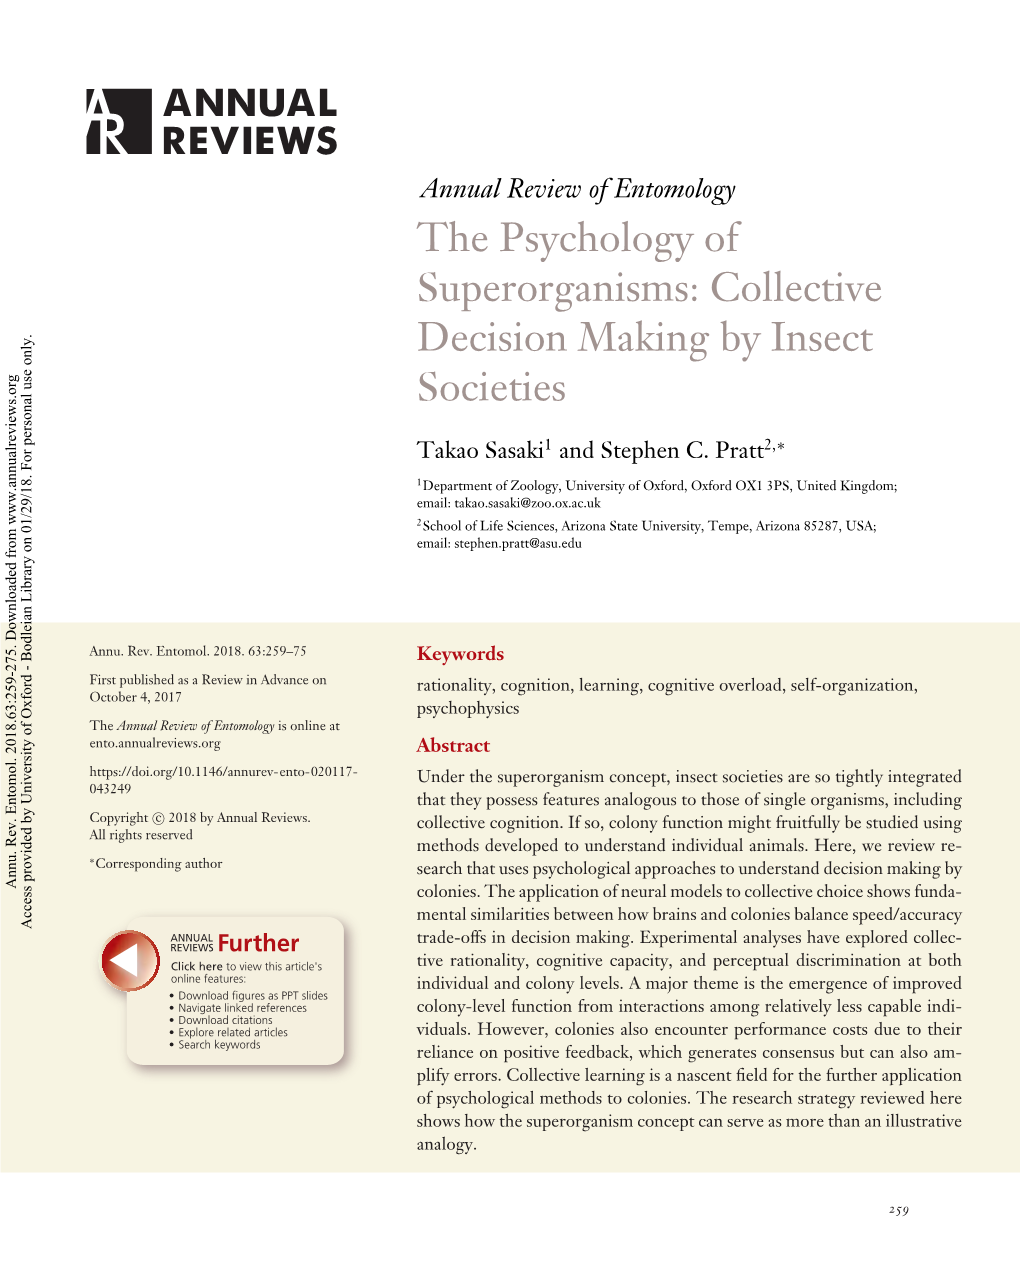 The Psychology of Superorganisms: Collective Decision Making by Insect Societies